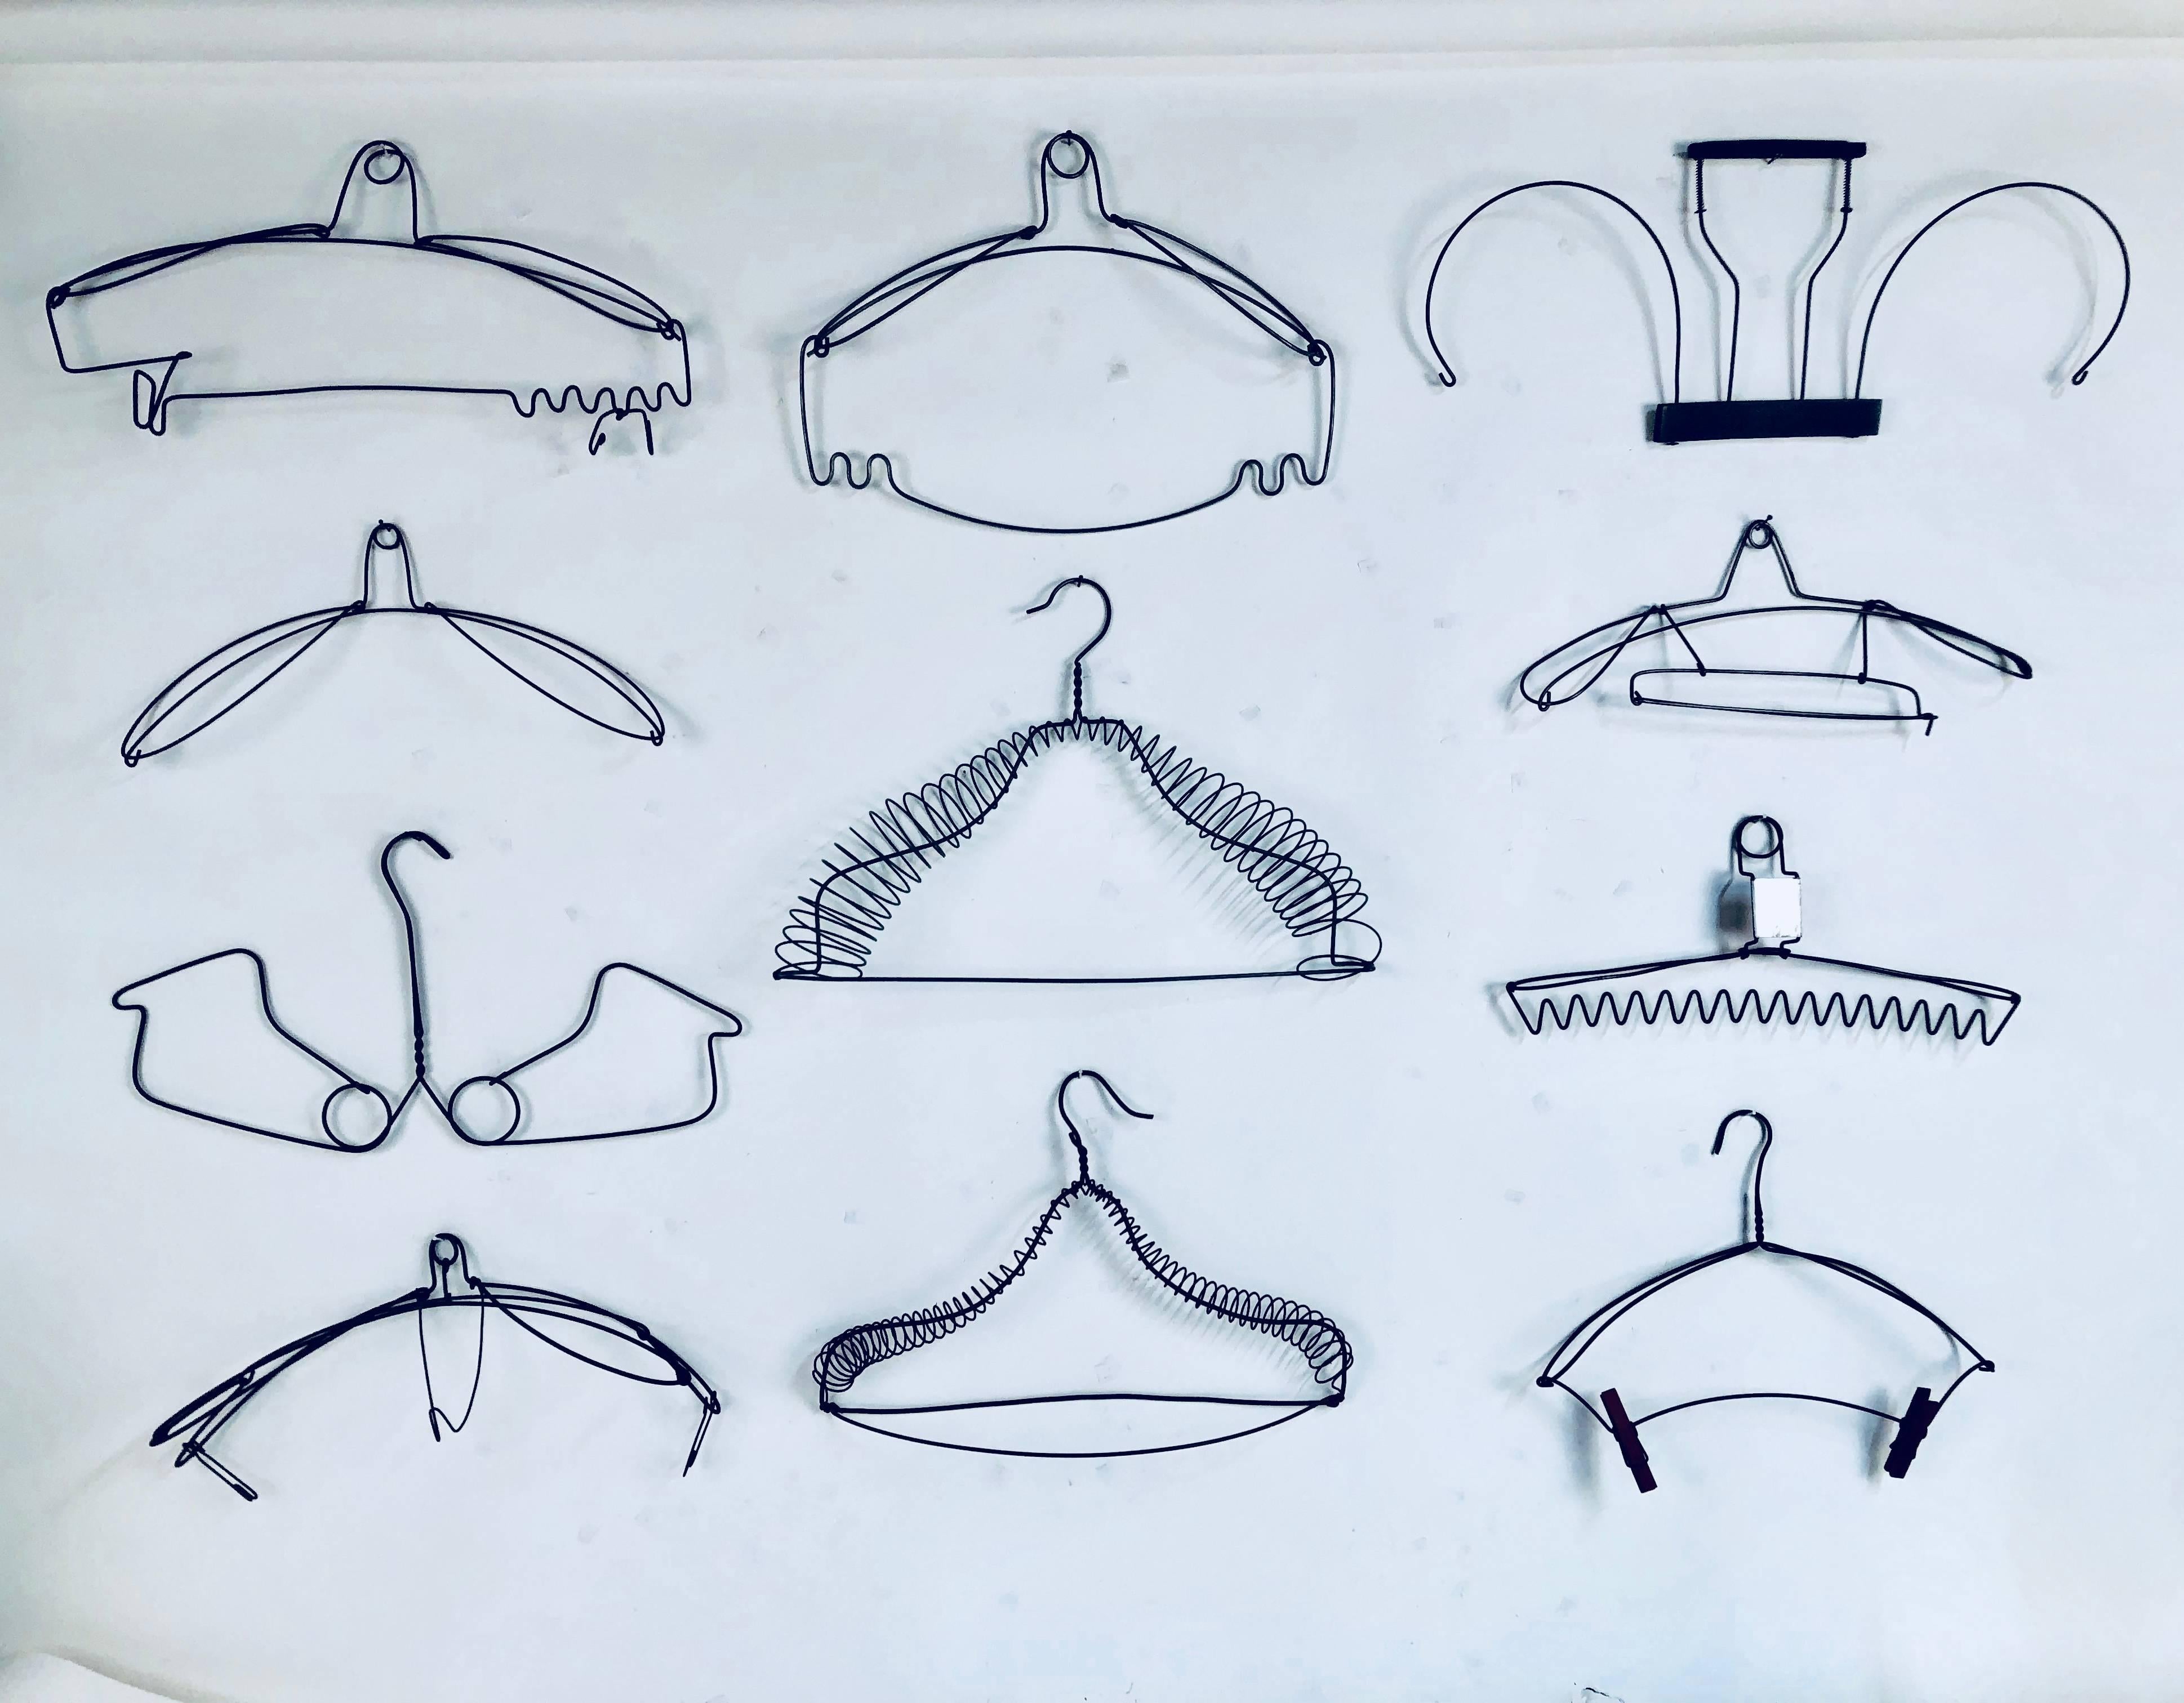 Collection of 11 antique wire hangers dating from 1880-1920. Beautiful abstract shapes. Range in size from 14.50 inches wide to 19 inches wide.